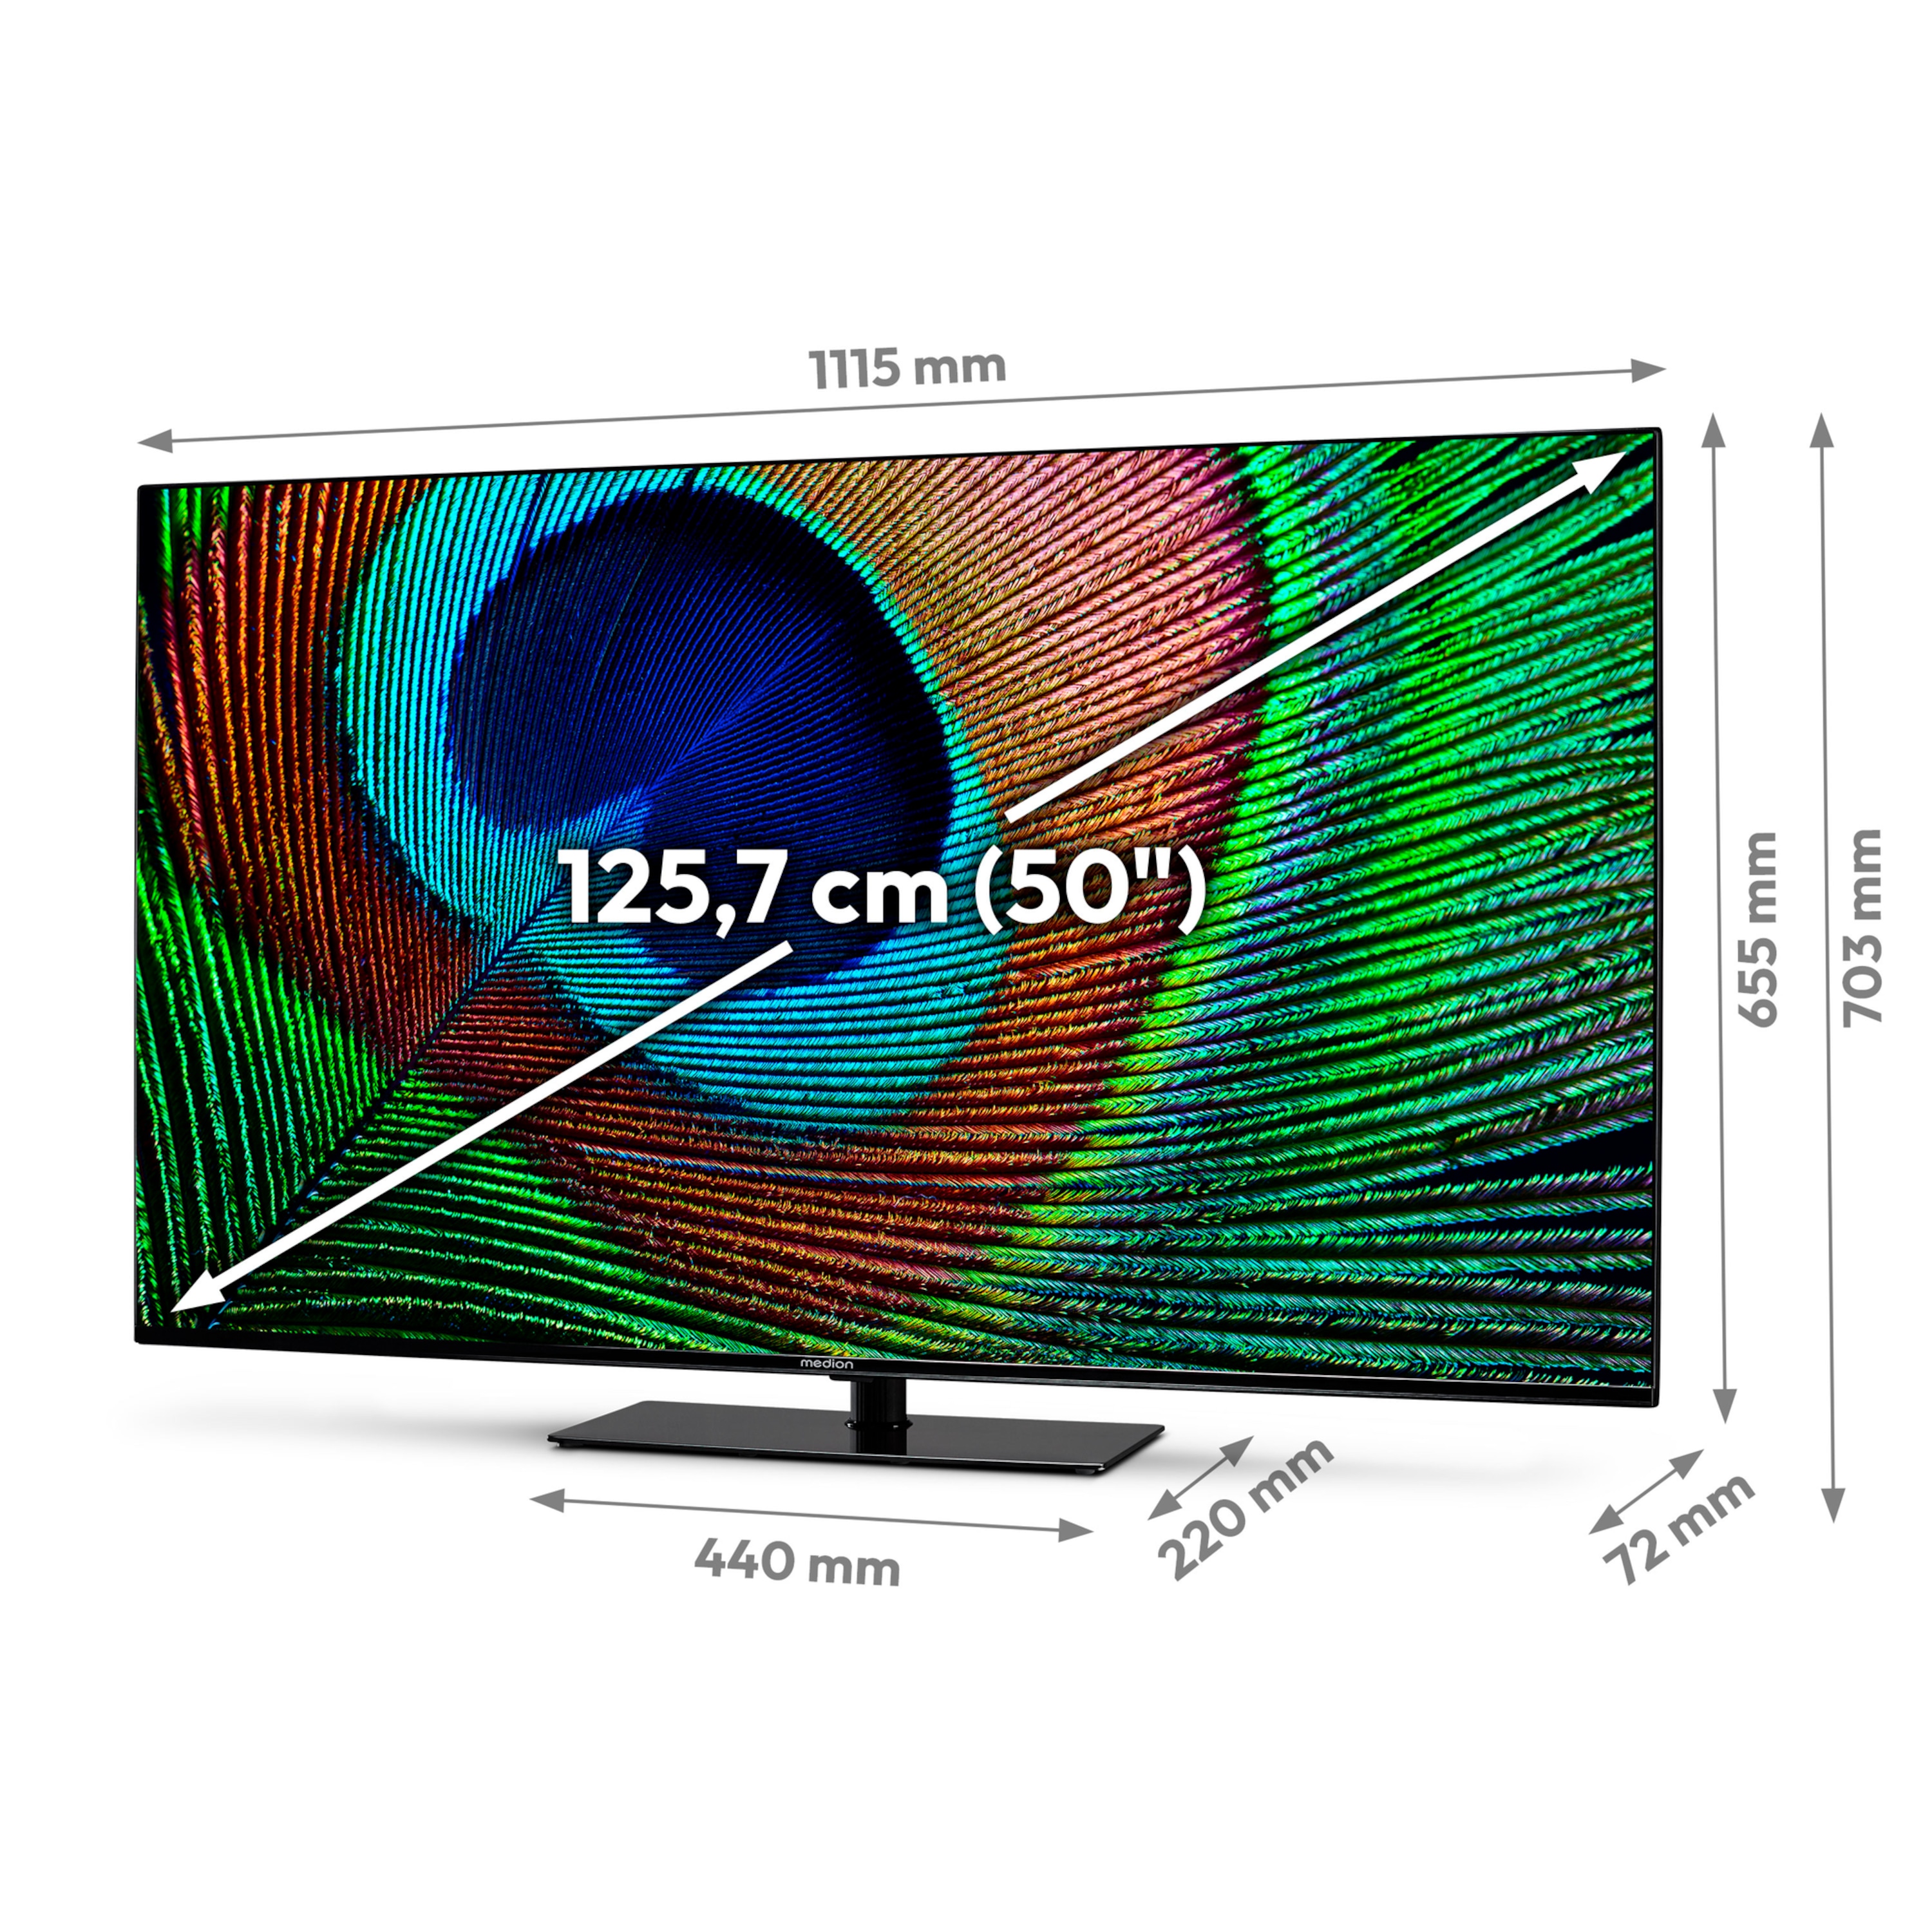 MEDION® LIFE® X15008 (MD 30881) Android TV™, 125,7 cm (50'') Ultra HD Smart-TV, HDR, Dolby Vision®, Micro Dimming, PVR ready, Netflix, Amazon Prime Video, Bluetooth®, Dolby Atmos, DTS Virtual X, DTS X, HD Triple Tuner, CI+